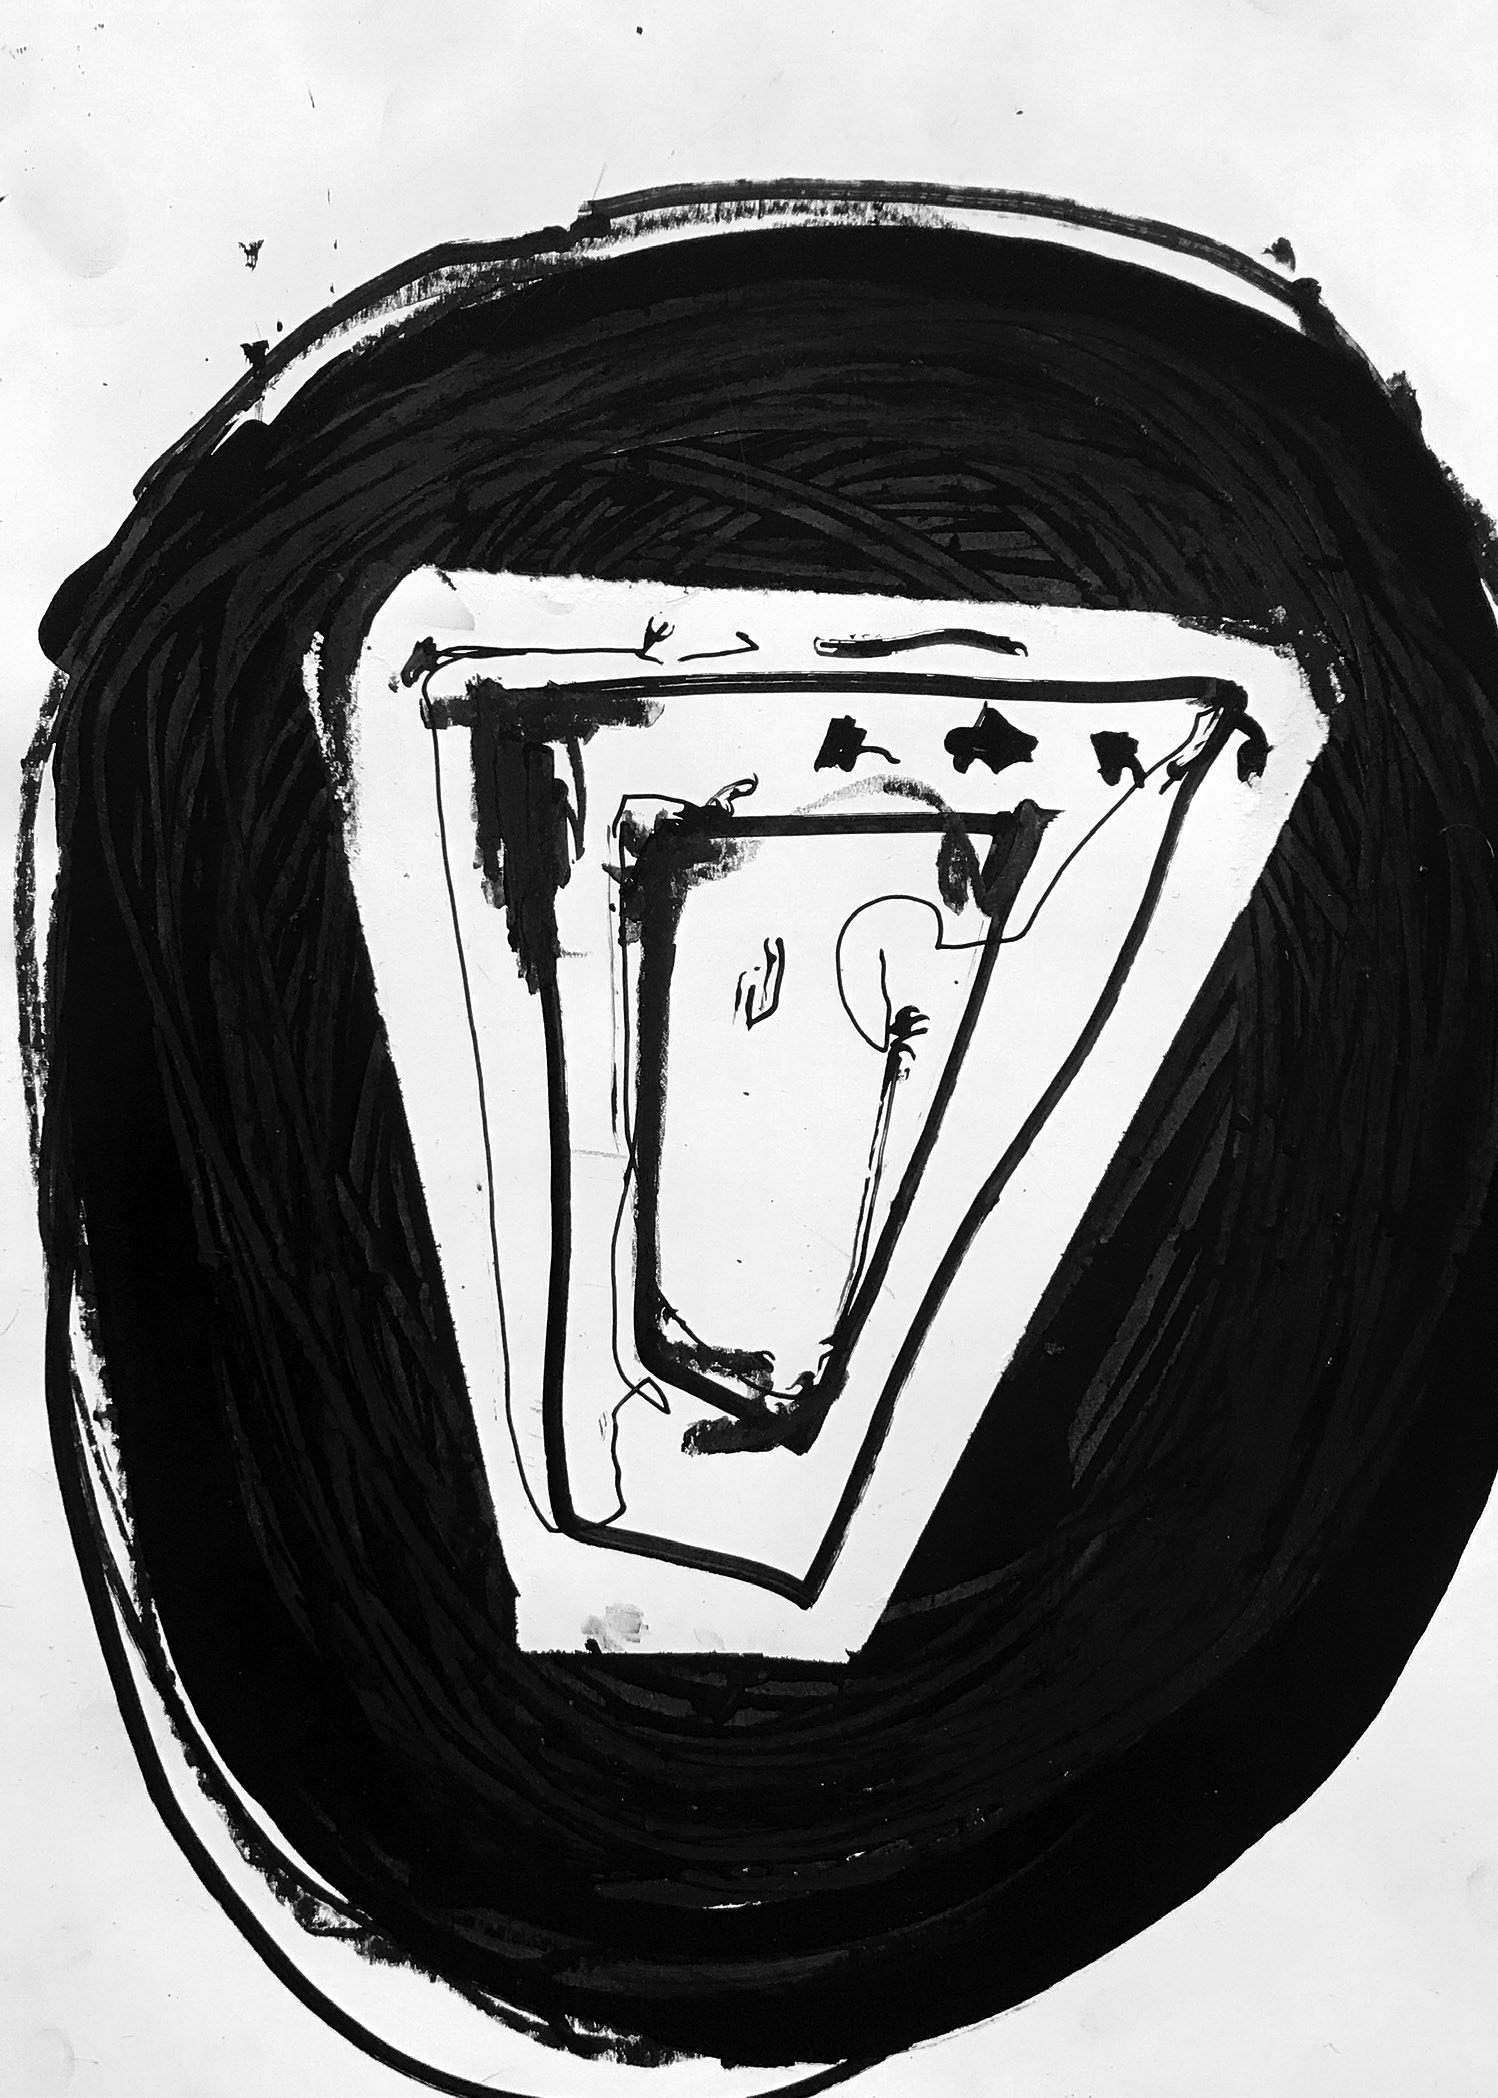 drawings, abstract, graphical, minimalistic, monochrome, people, black, acrylic, crayons, abstract-forms, Buy original high quality art. Paintings, drawings, limited edition prints & posters by talented artists.